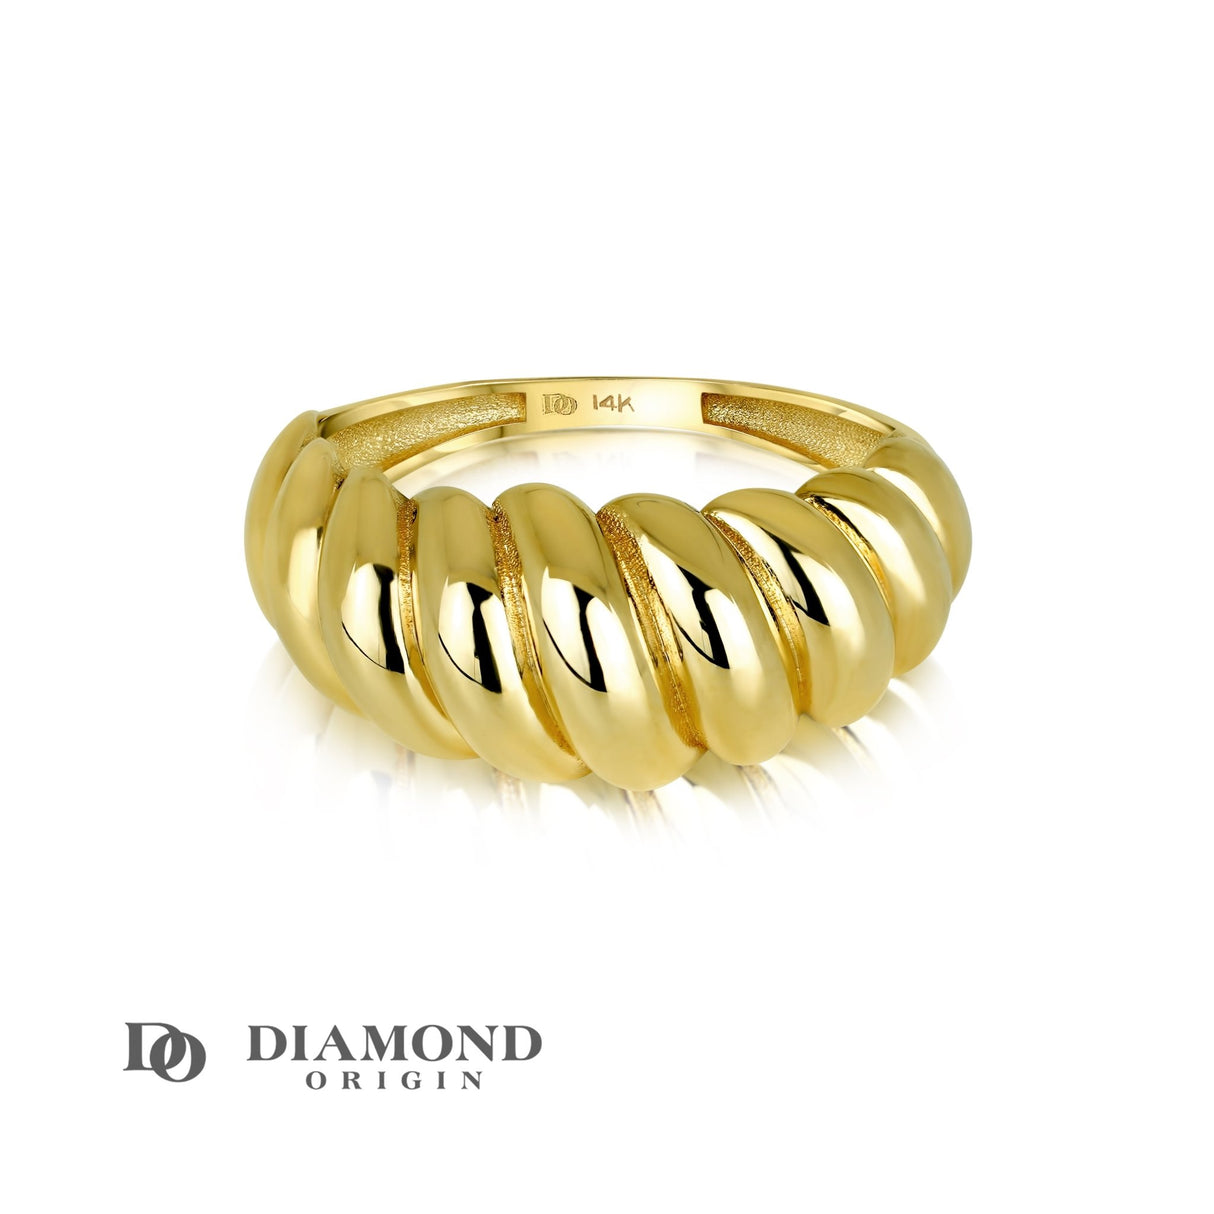 This exquisite Twisted Dome Ring from Diamond Origin perfectly captures the essence of timeless elegance and modern design. Crafted from the finest gold, the ring boasts a unique twisted dome shape that makes a bold yet refined statement. diamond origin, stackable rings, gold rings, 14K gold rings,